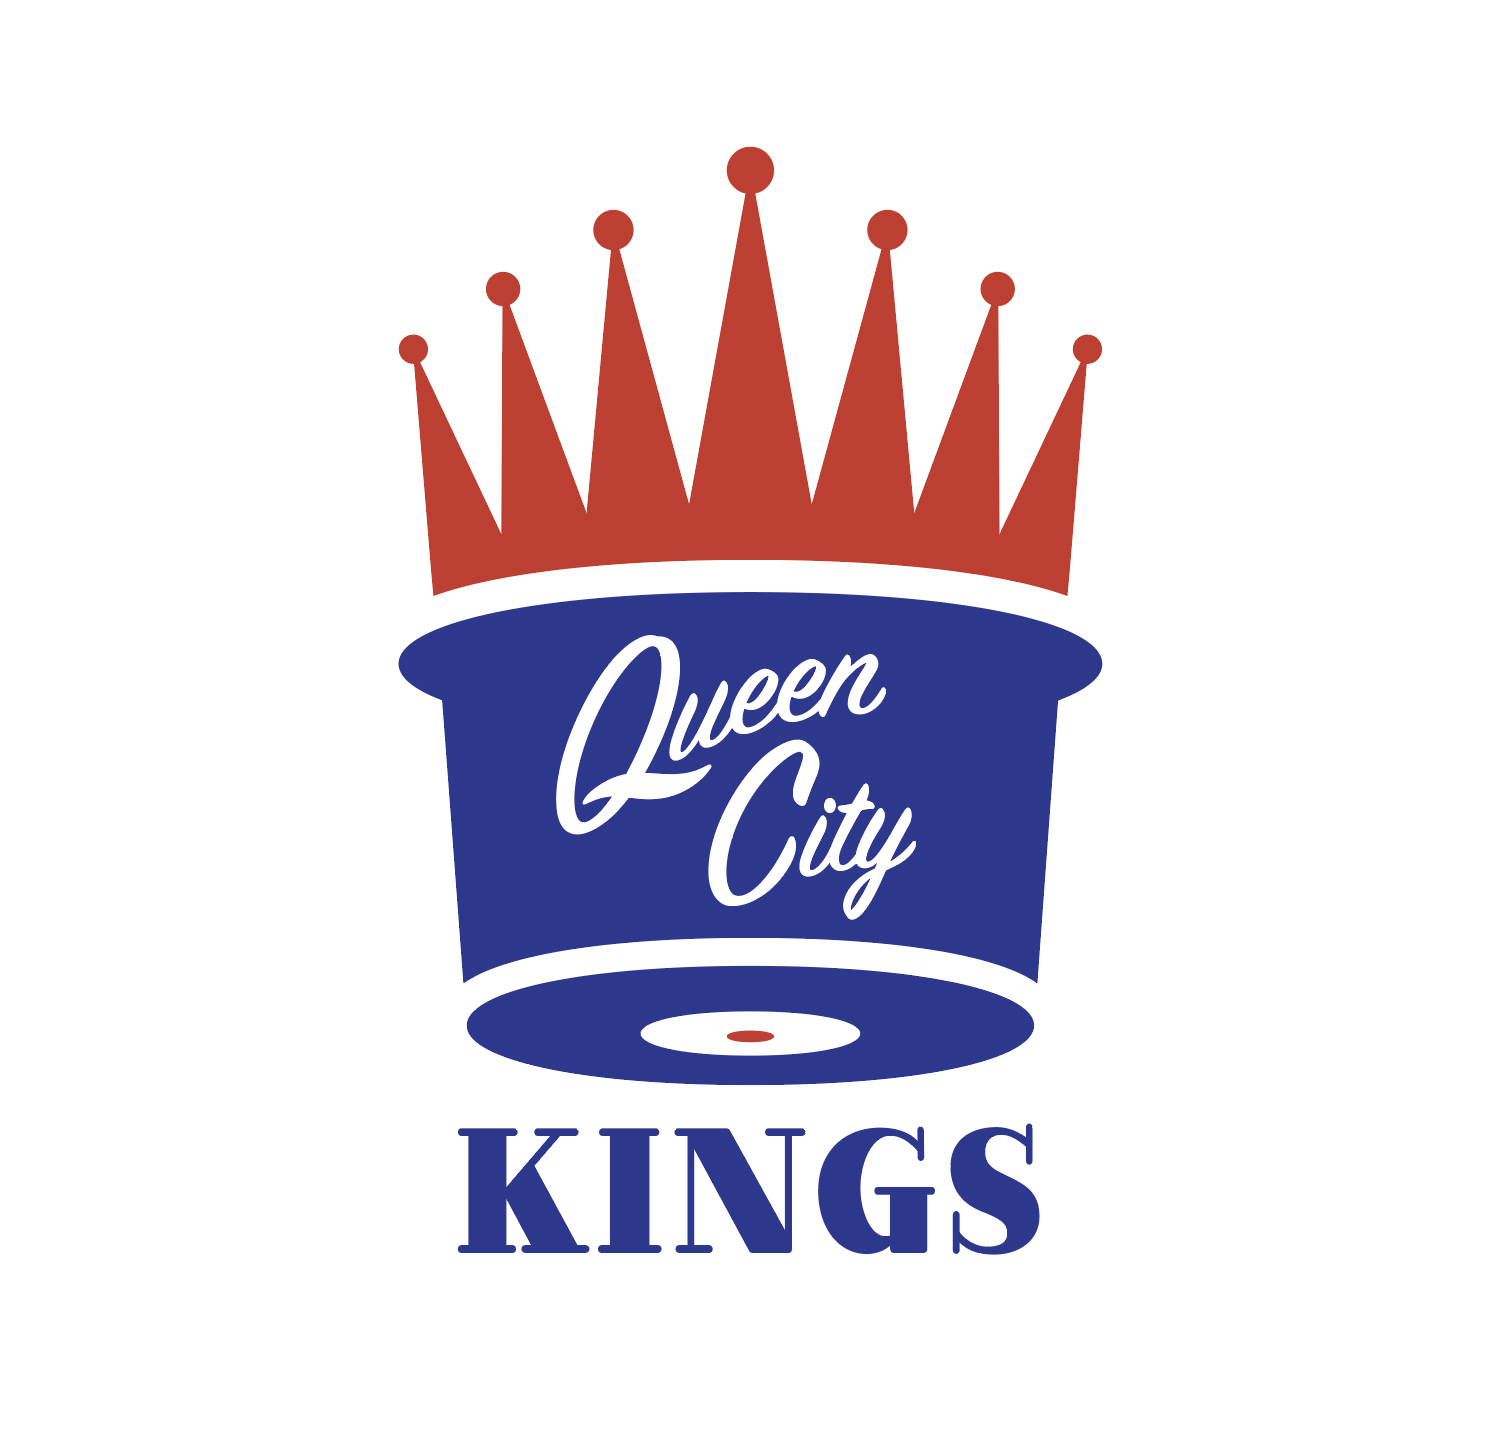 Queen City Kings logo design by logo designer SnellBeast for your inspiration and for the worlds largest logo competition